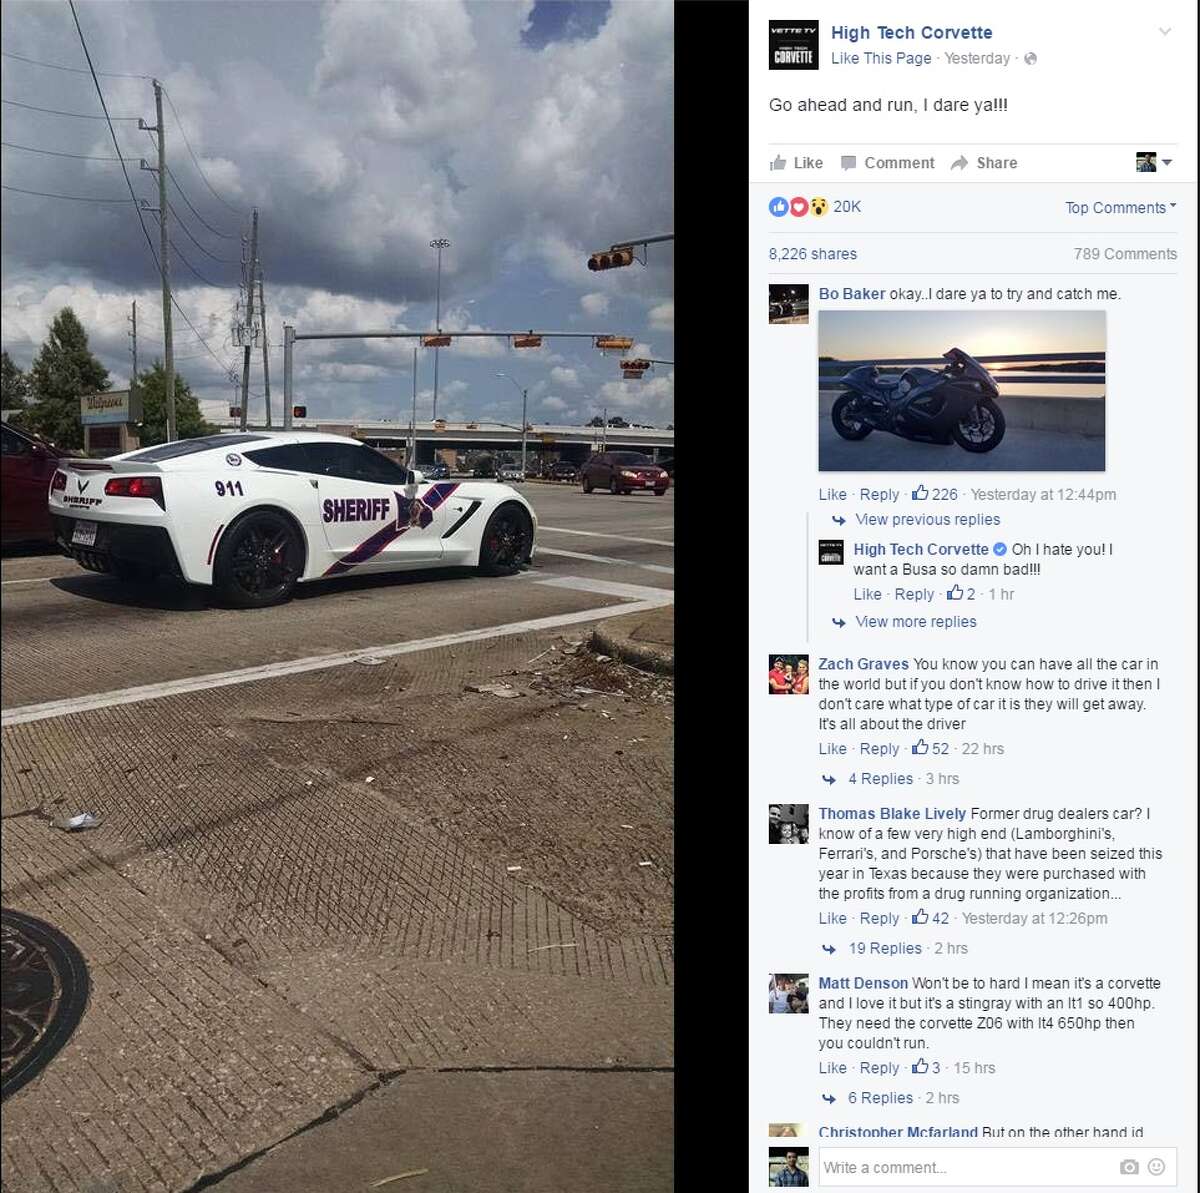 A Corvette with a Montgomery County Sheriff's Office decal on it has been spotted in late July, 2016. Lt. Brady Fitzgerald with the Sheriff's Office said the car belongs to a dealership in Montgomery County and is being used in an expo show in Dallas July 23 and 24, 2016. It isn't owned by the Sheriff's Office. From High Tech Corvette